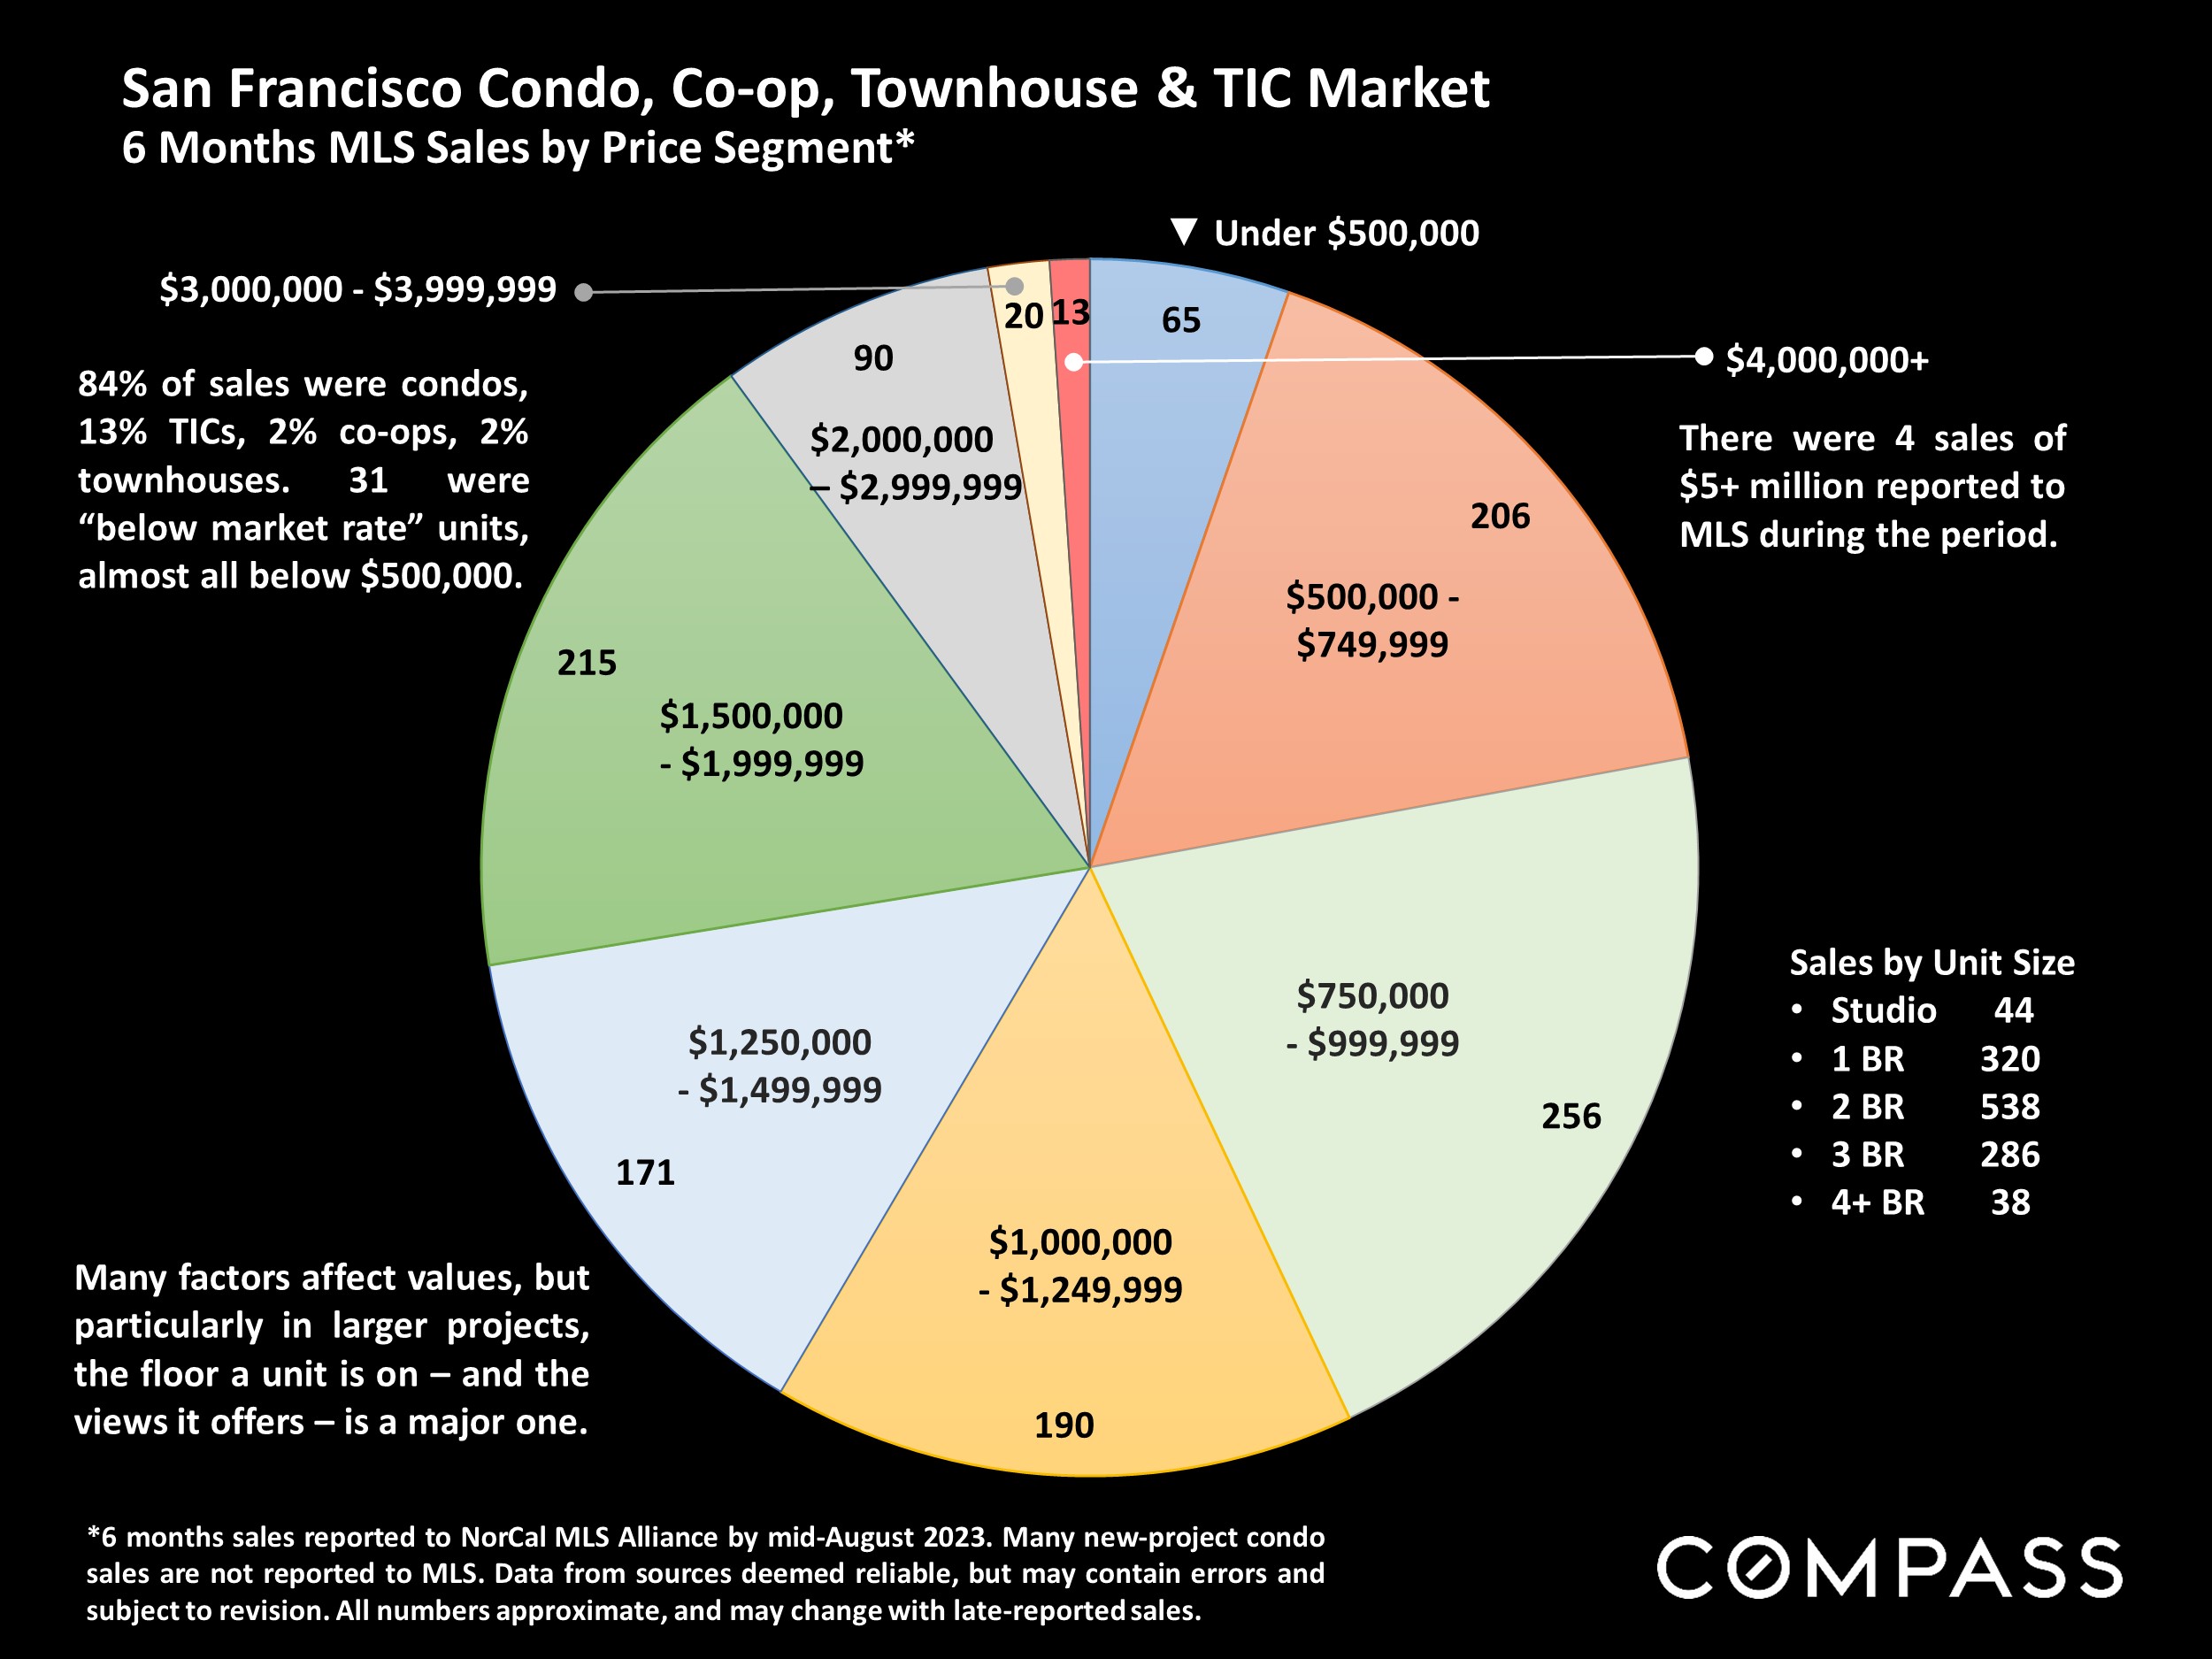 San Francisco Condo, Co-op, Townhouse & TIC Market 6 Months MLS Sales by Price Segment*